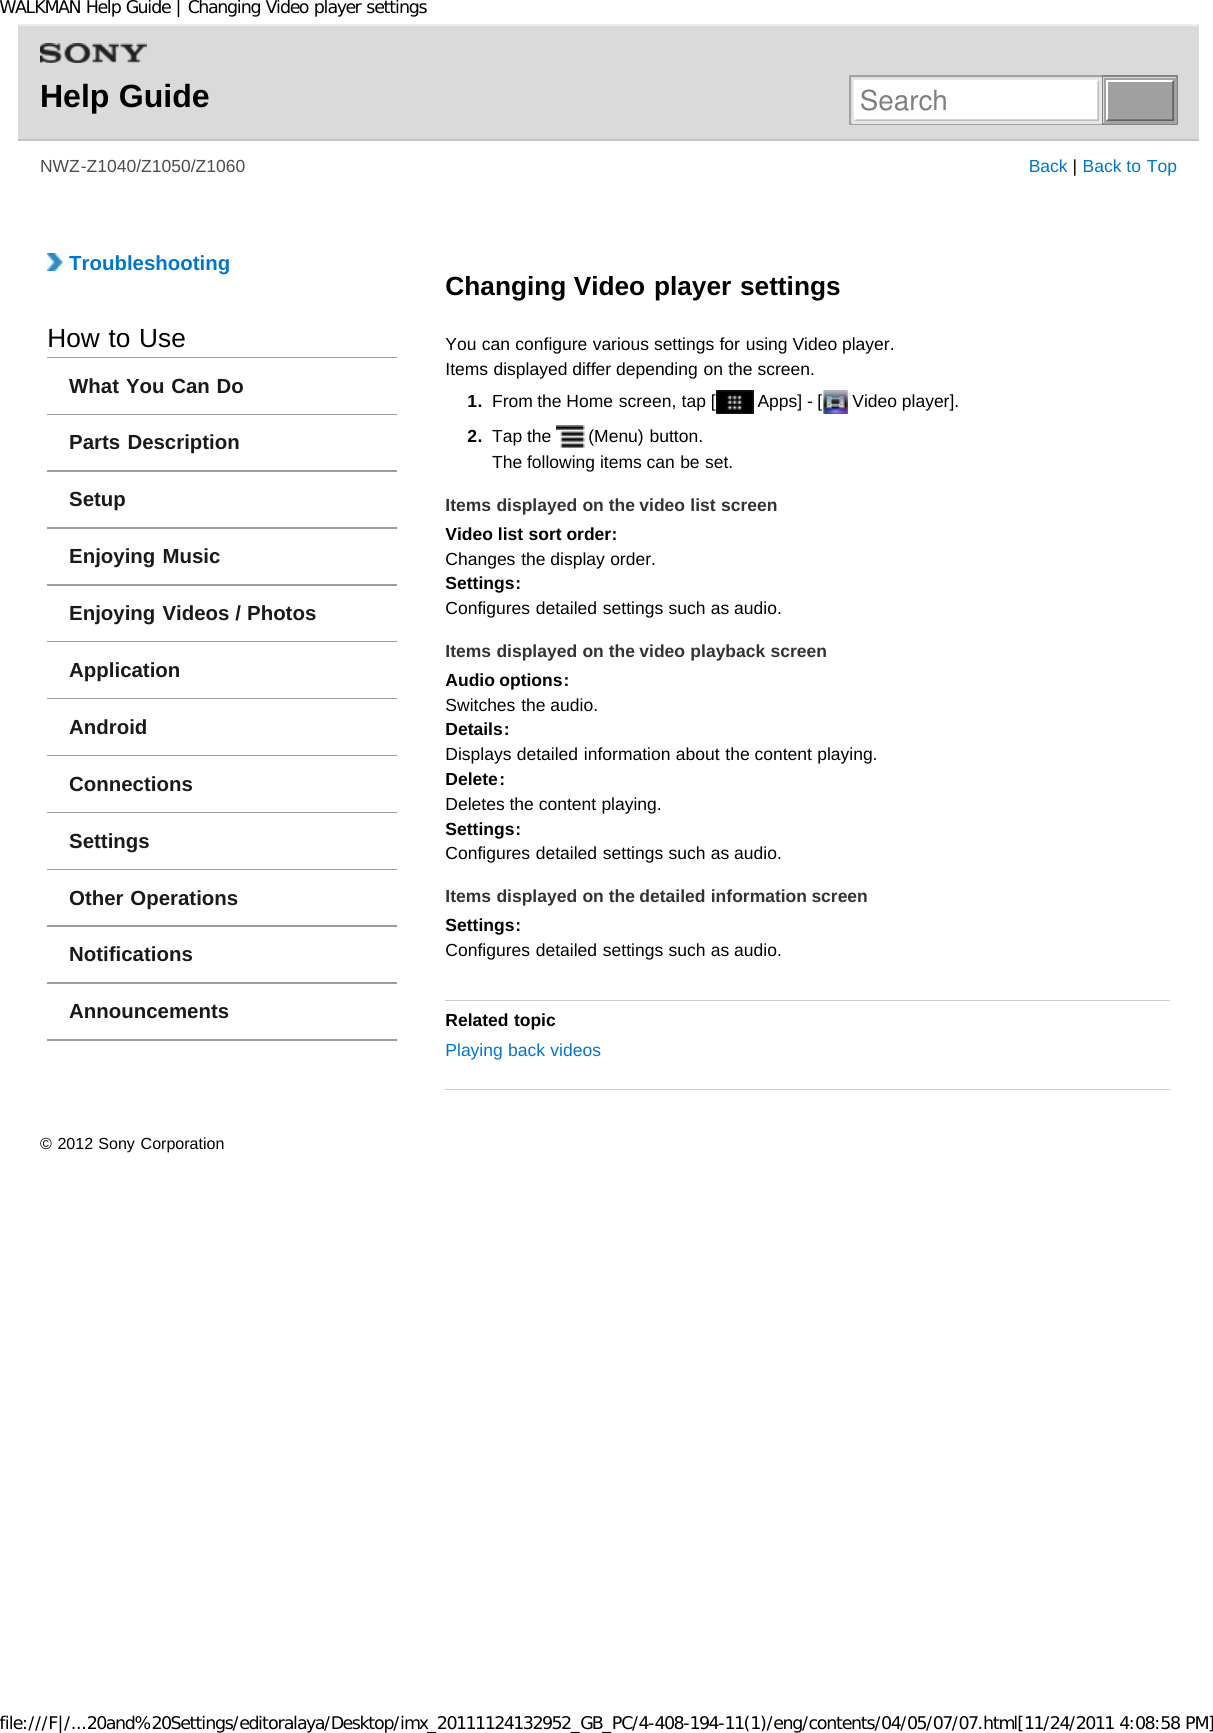 Page 188 of Sony Group NWZZ1000 Digital Media Player User Manual WALKMAN Help Guide   Top page